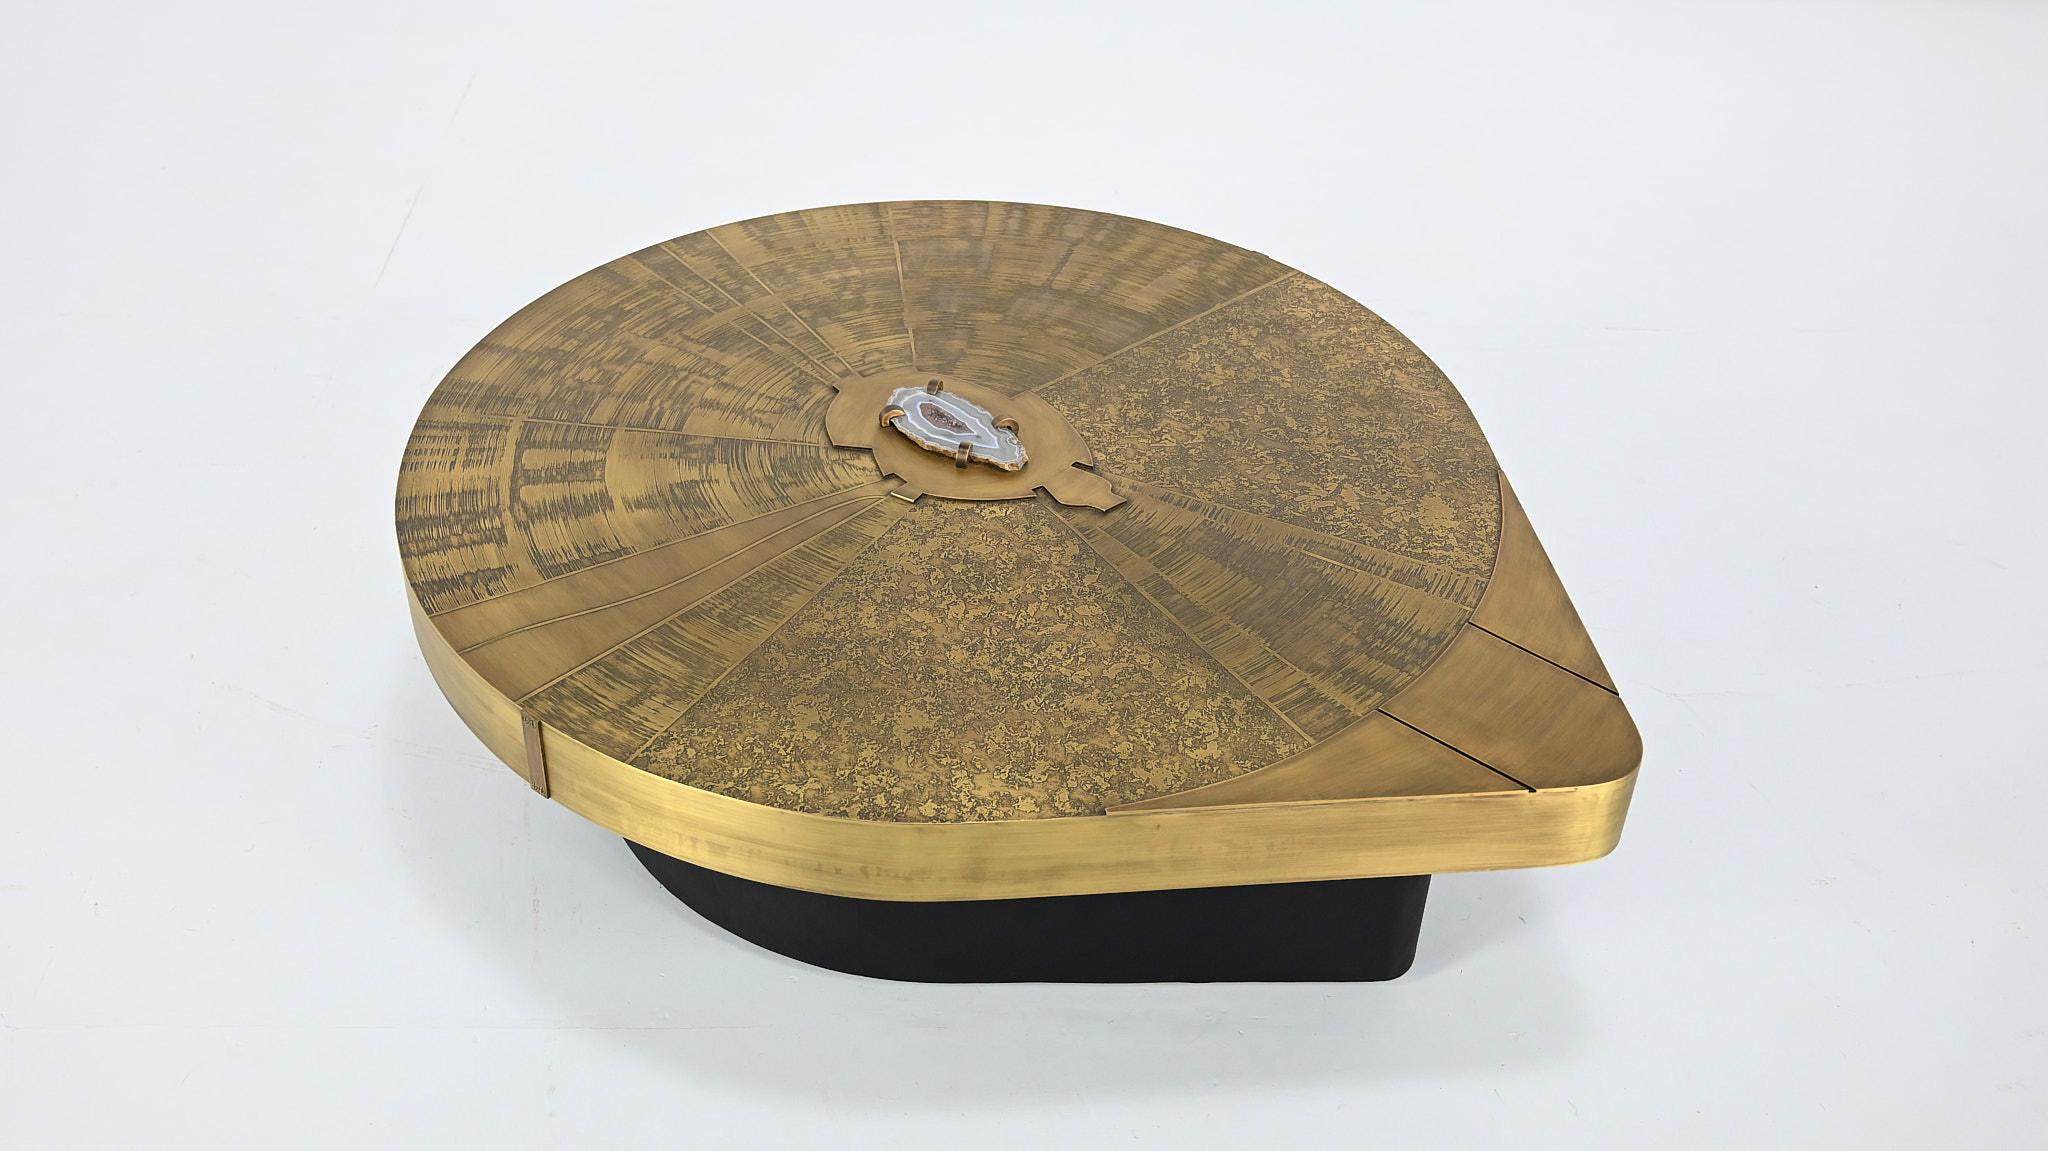 Superb and unique free-form coffee table in acid-etched brass set with an agate stone. Made to order in Belgium in the 1990s, and inspired by the work of designers Ado Chale, Christian Krekels and Jean-Claude Dresse. Brass plated on wood, base